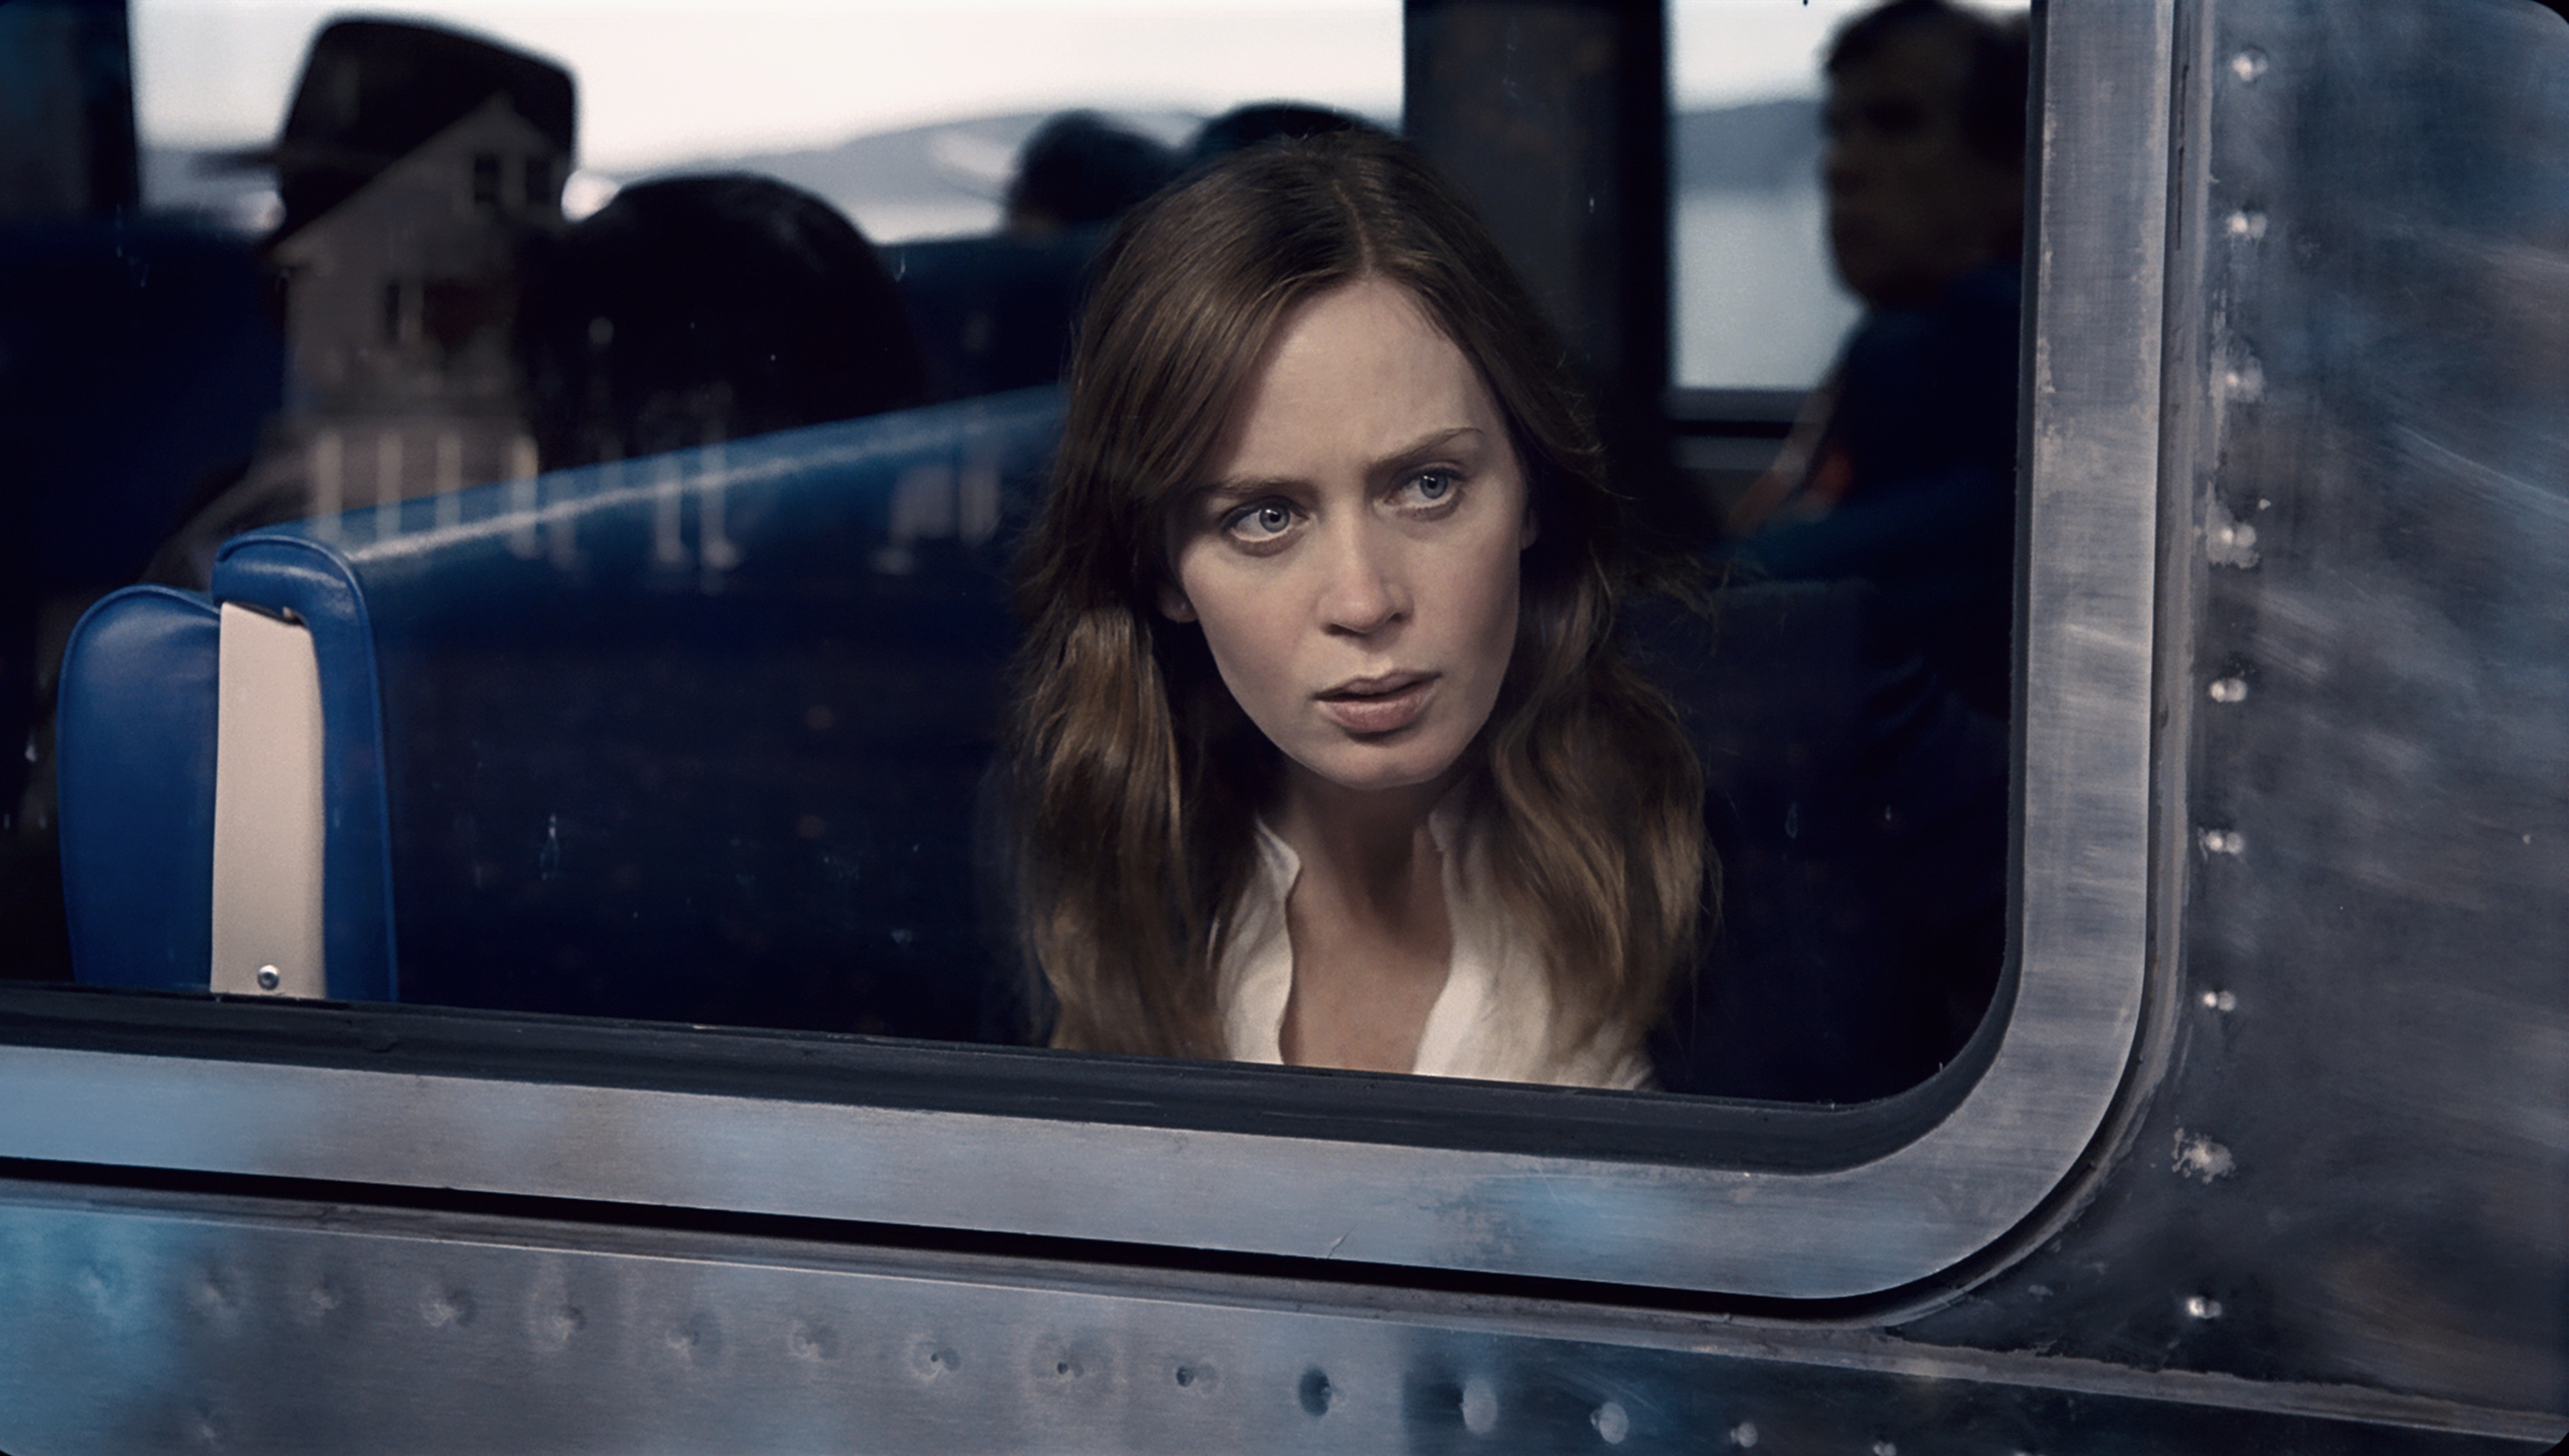 THE GIRL ON THE TRAIN Isn’t a Classic, But Provides Some Pulpy Sights